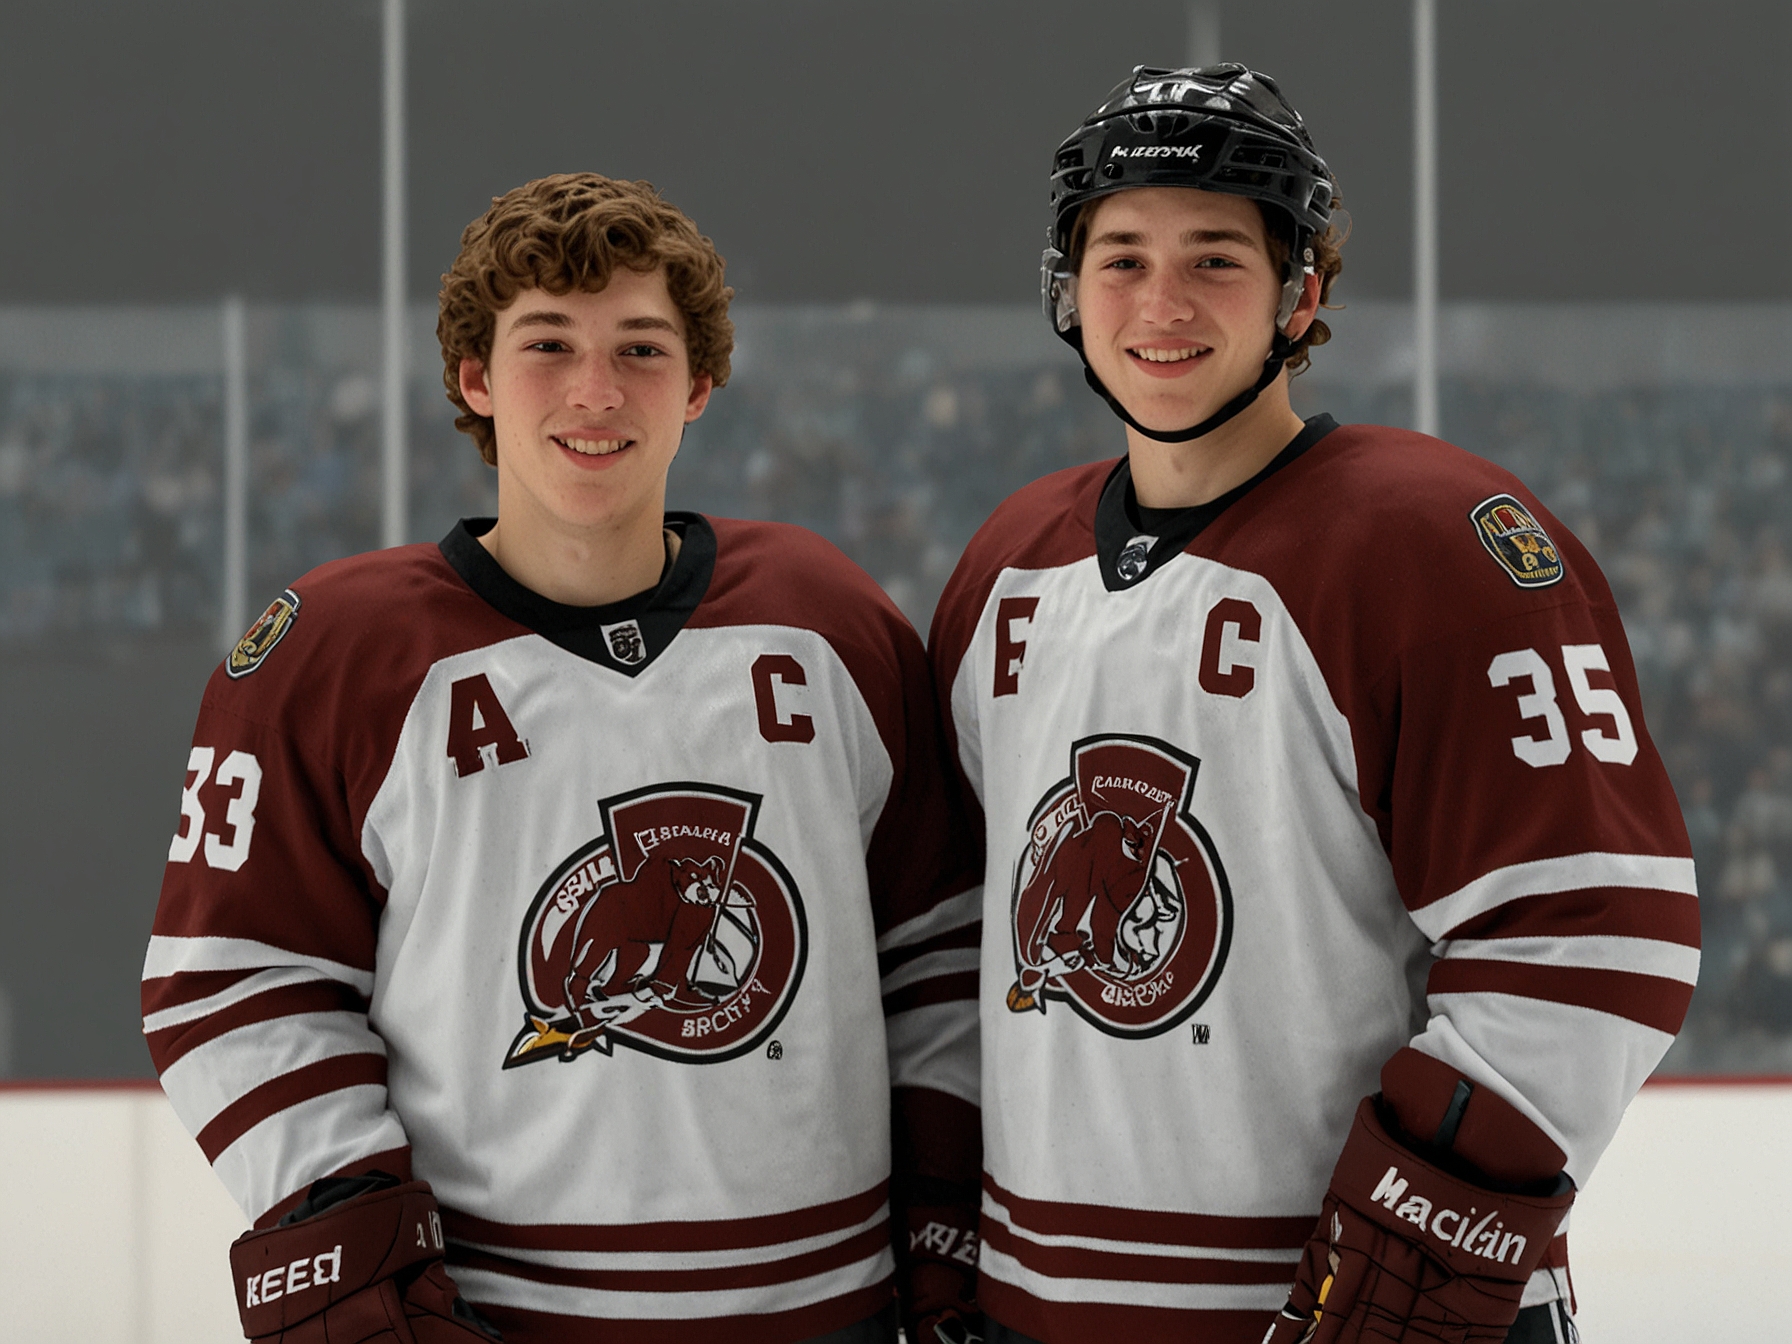 Photo of Macklin Celebrini and Cole Eiserman during their time at Shattuck-St. Mary’s, illustrating their strong on-ice chemistry and successful partnership.